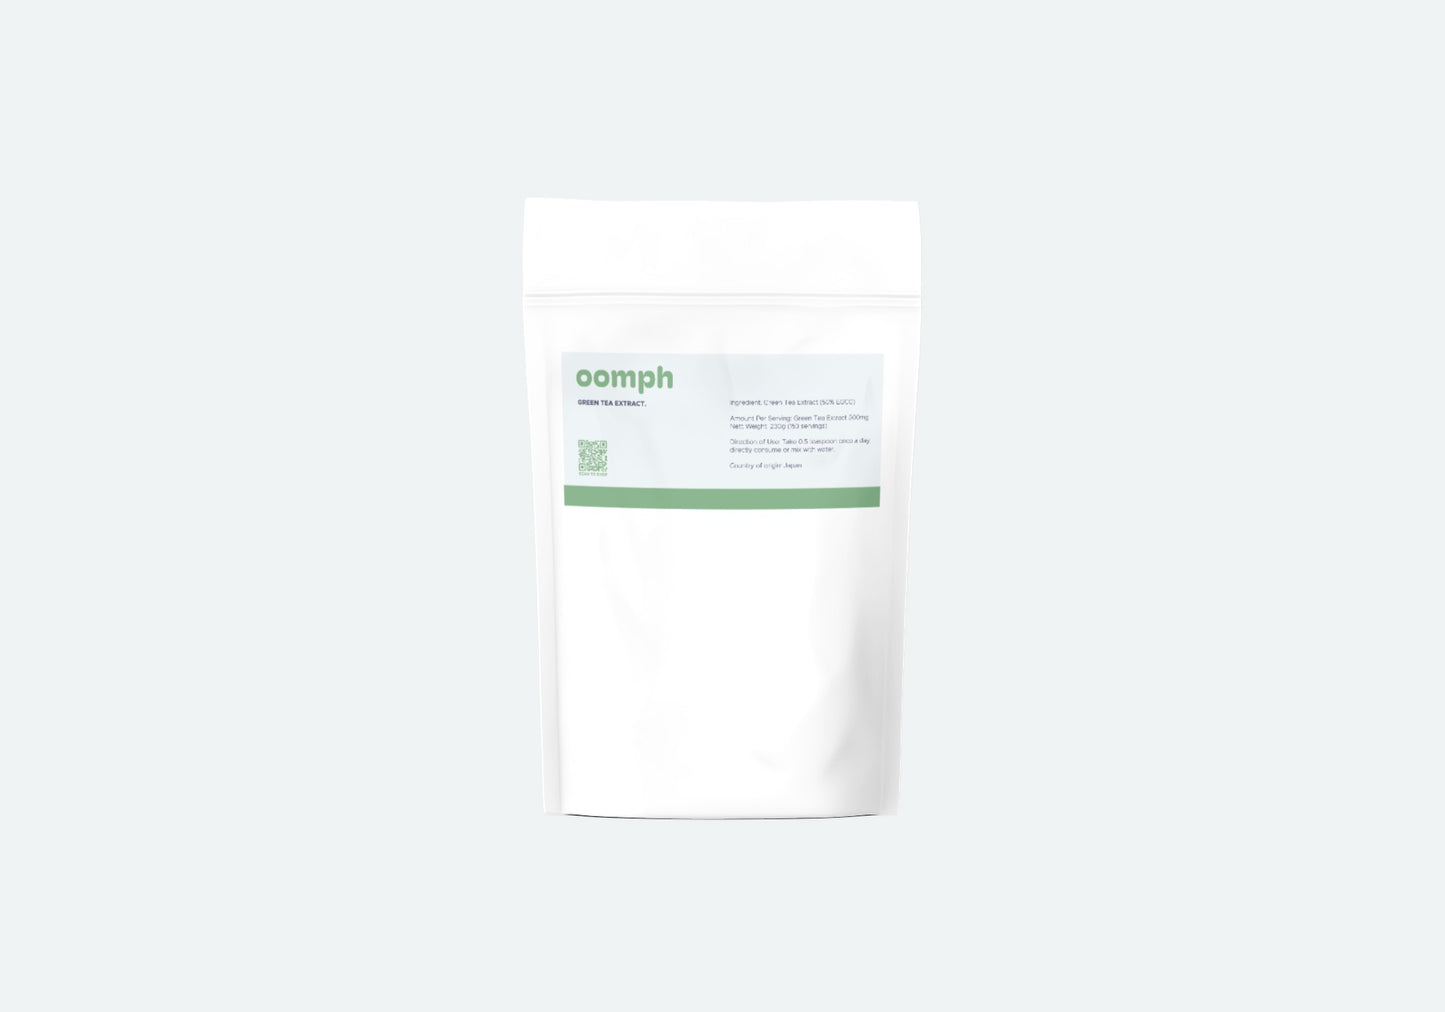 OOMPH Green Tea Extract 200g